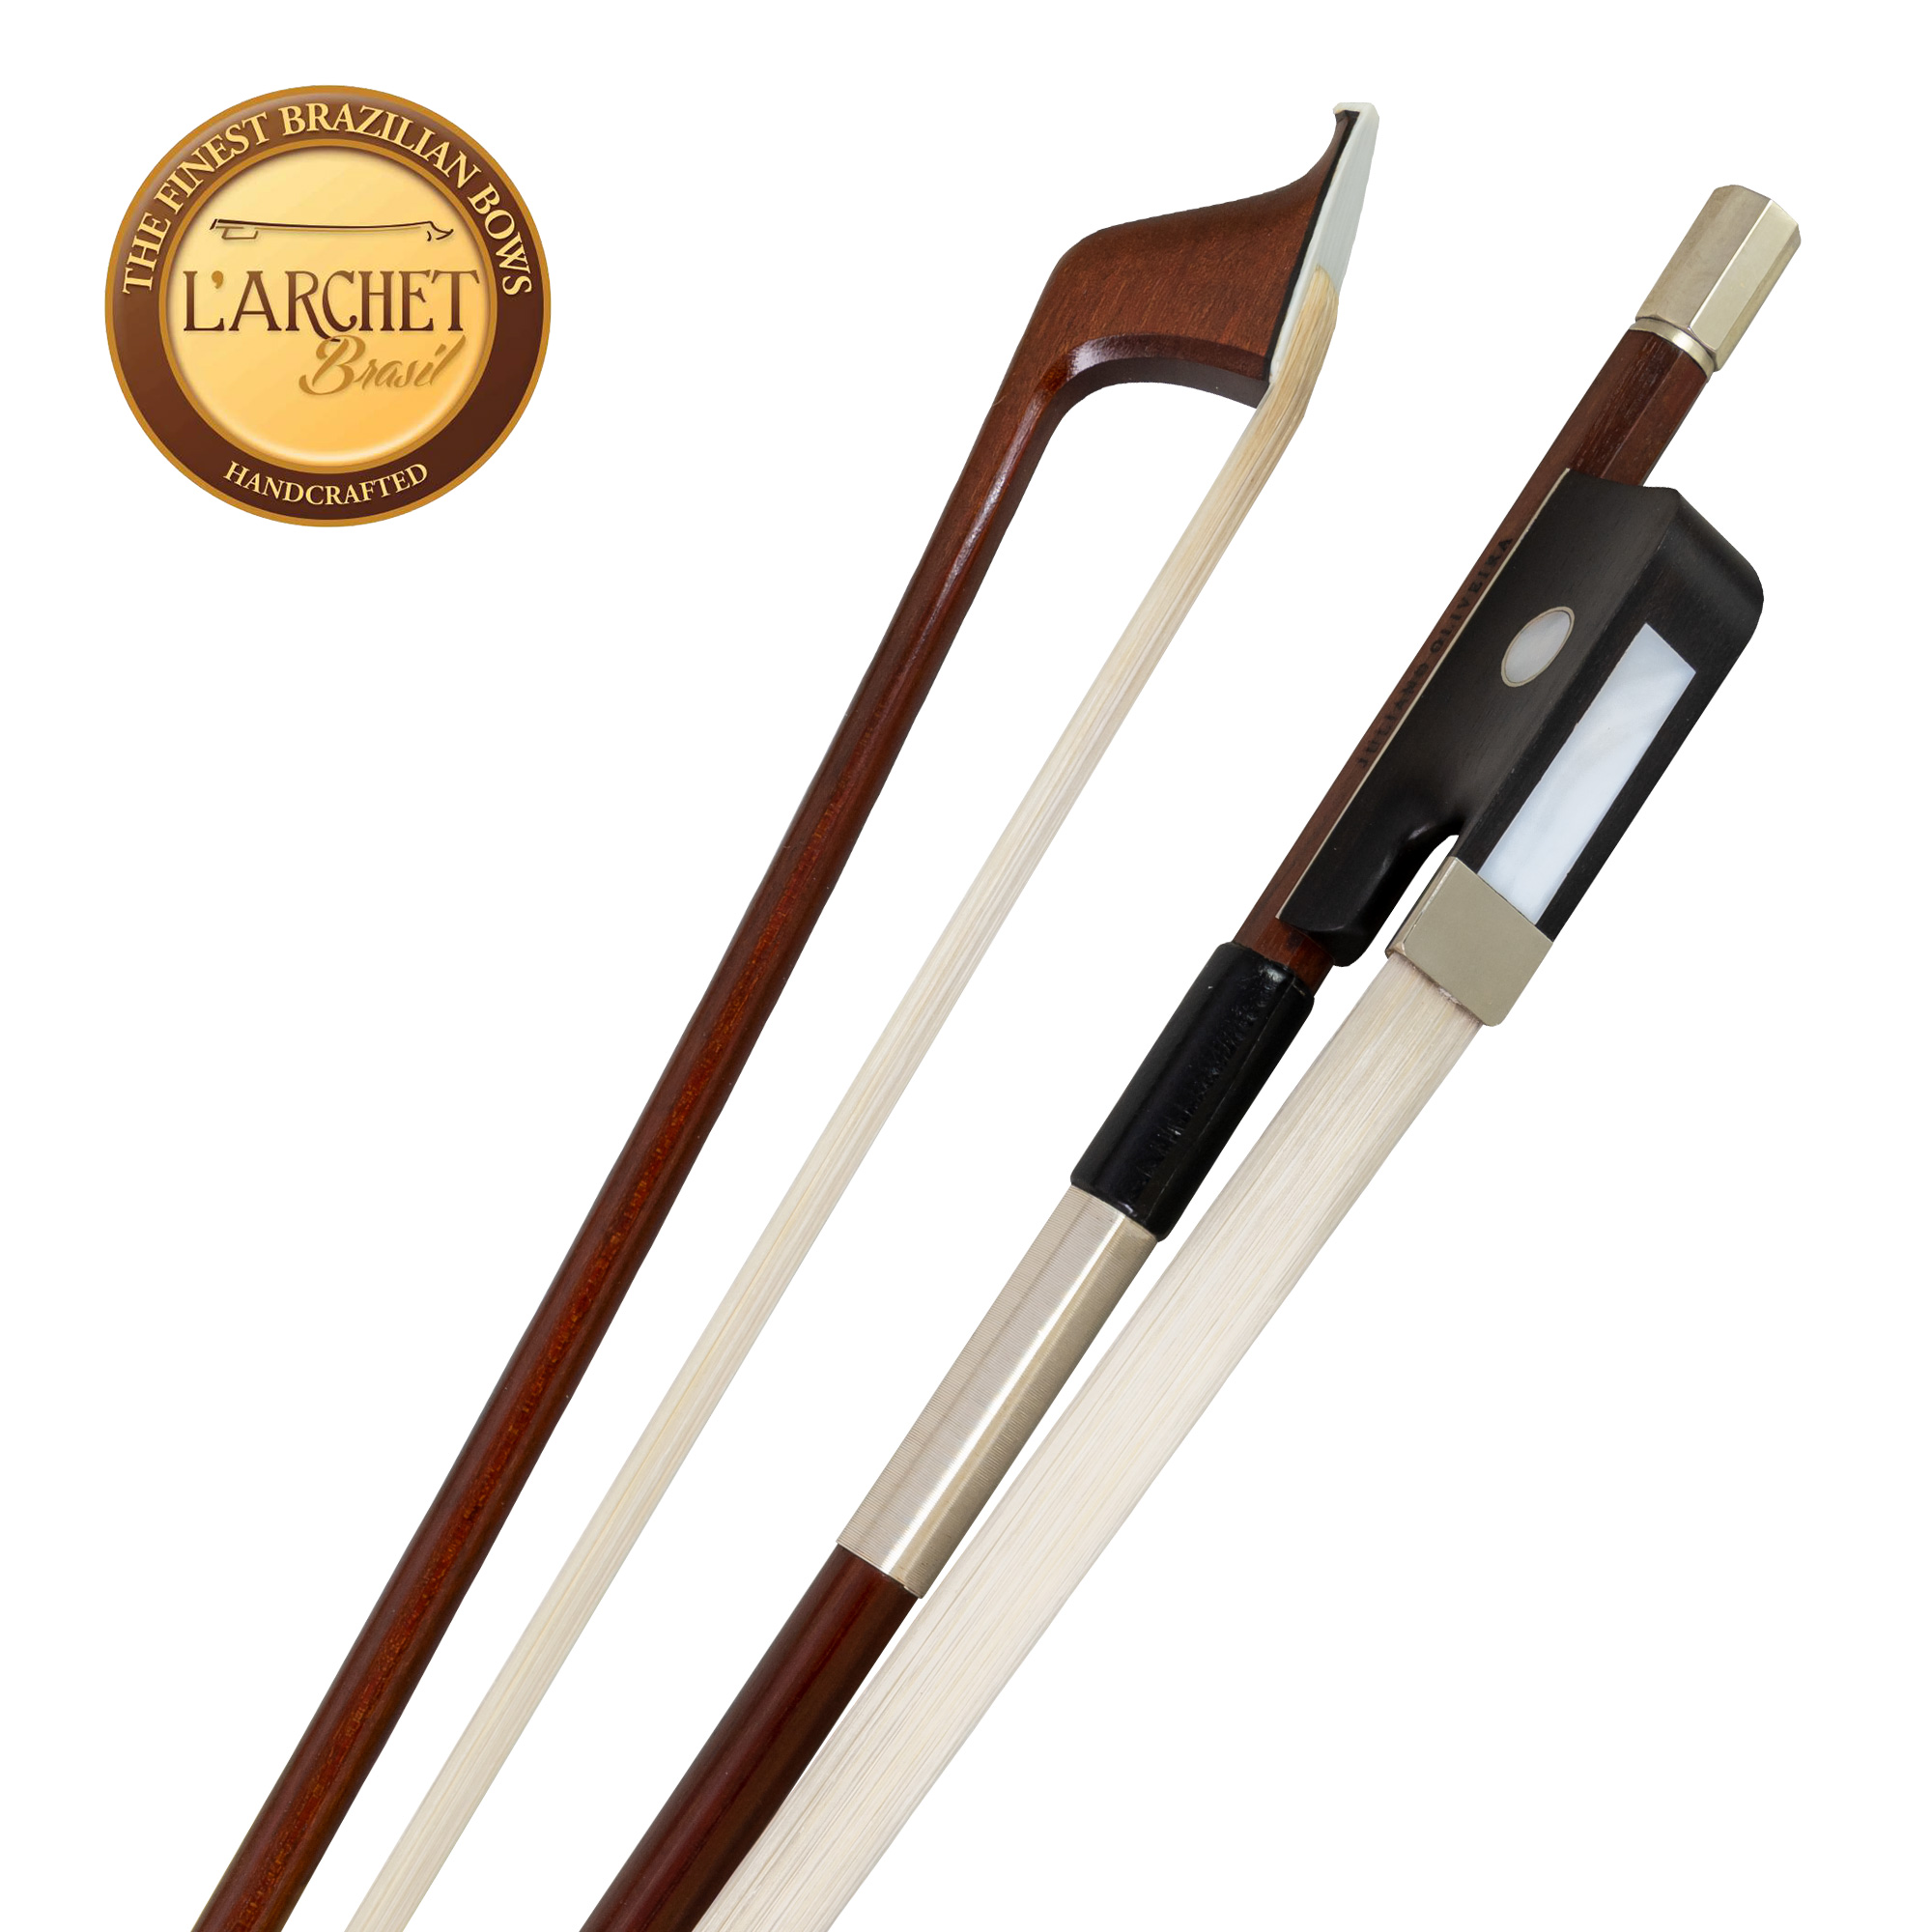 L'archet Brasil Nickel Half-Mounted Cello Bow in action